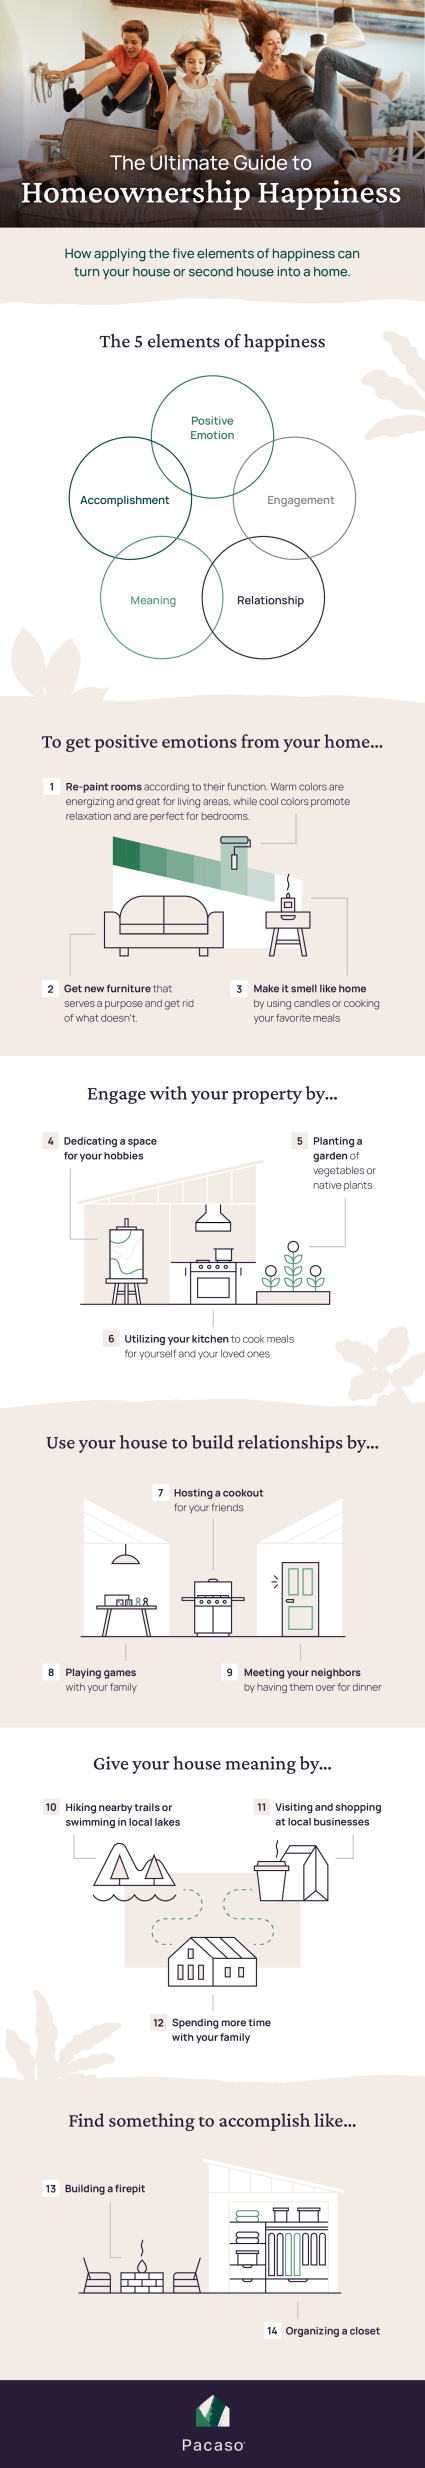 An infographic identifies the 5 elements of happiness and provides suggestions for how to make a house a home.